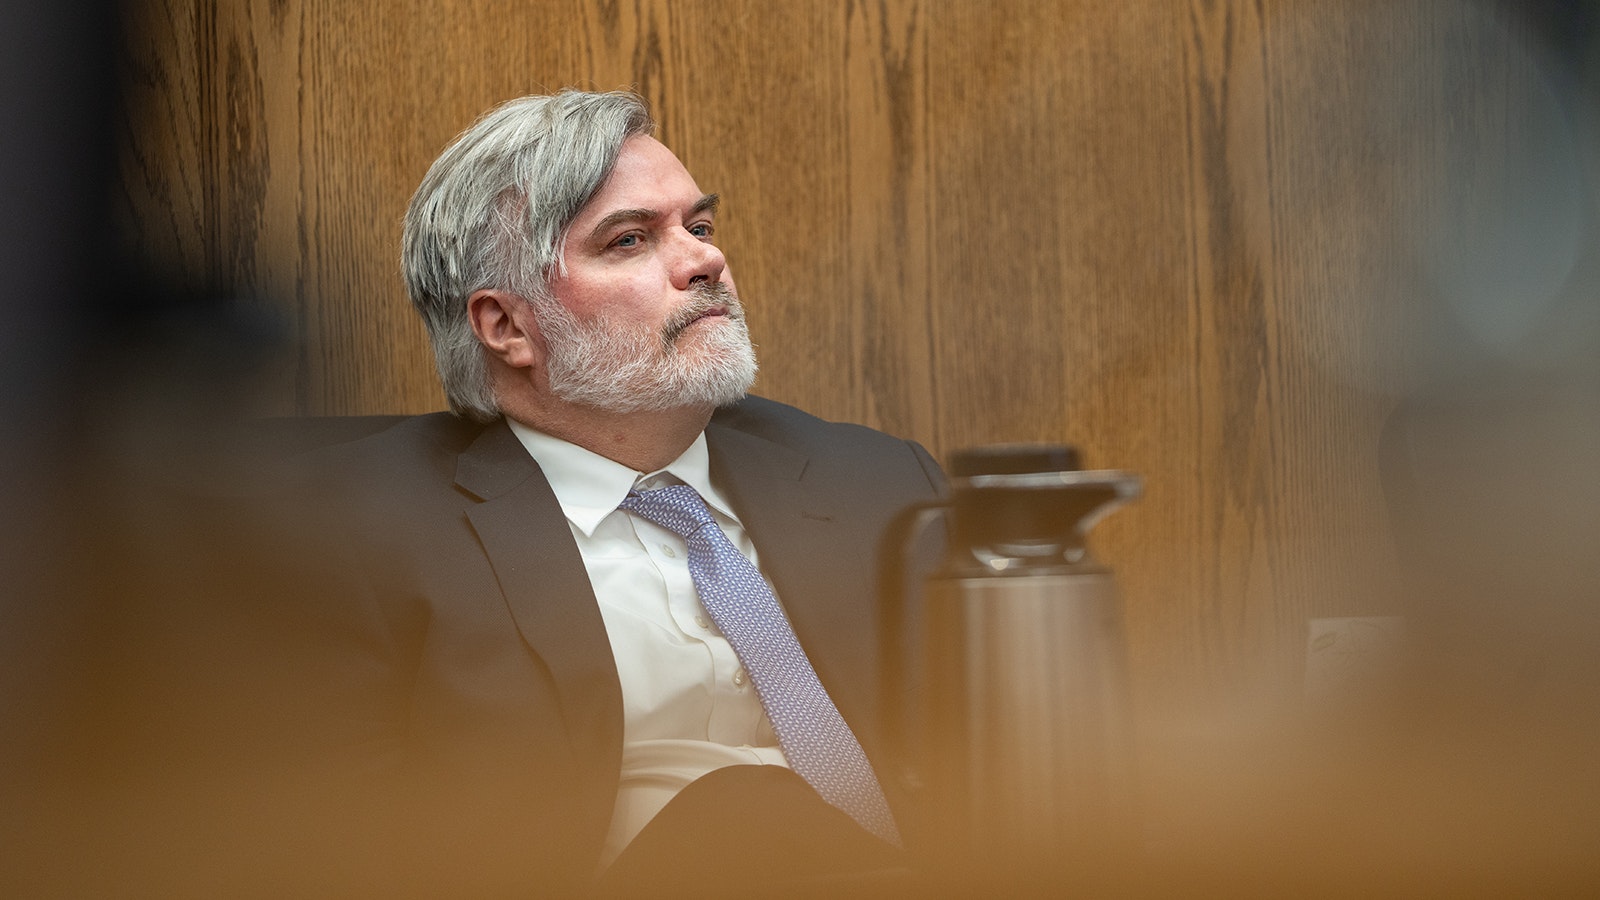 Jay Jerde, special assistant attorney general for the state, listens as the plaintiffs’ attorneys address 9th Judicial District Court Judge Melissa Owens during a summary judgment hearing Thursday in Teton County District Court.